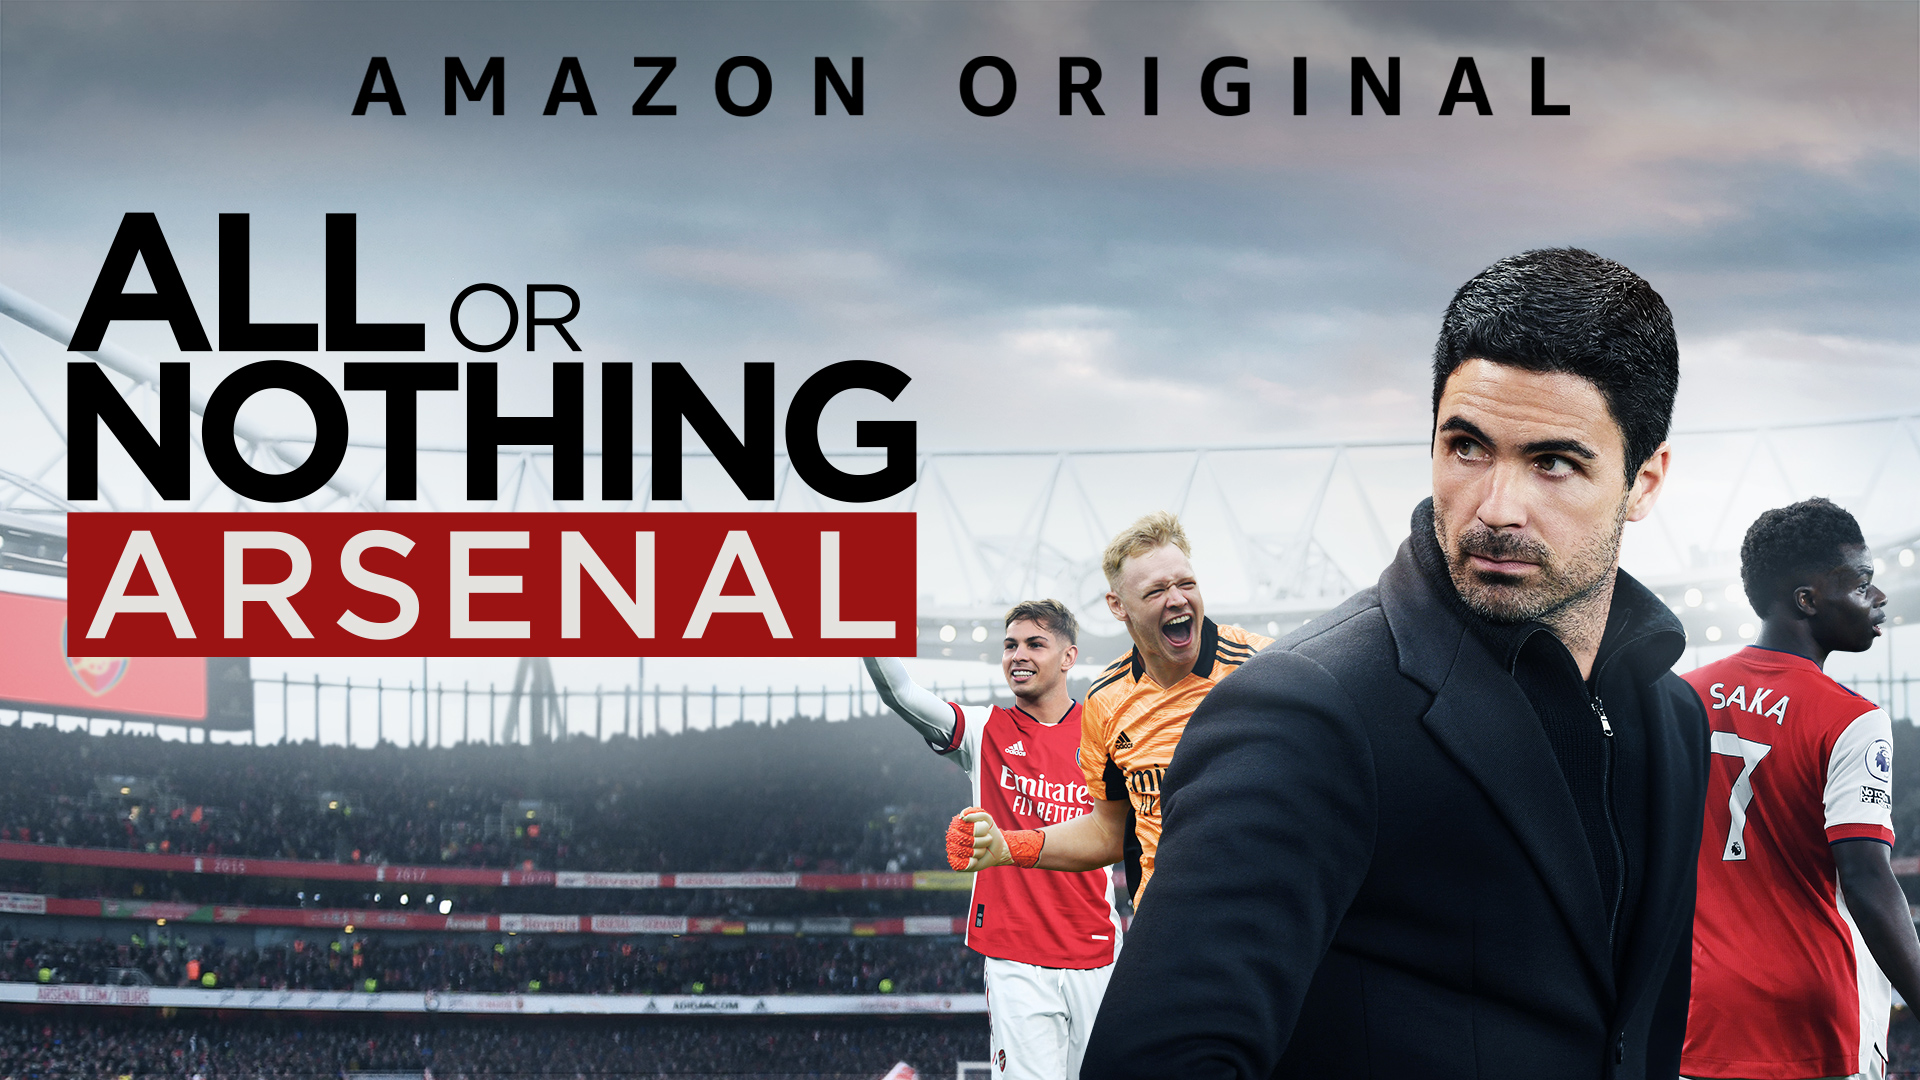 Promotional image for the Amazon Original series All or Nothing: Arsenal